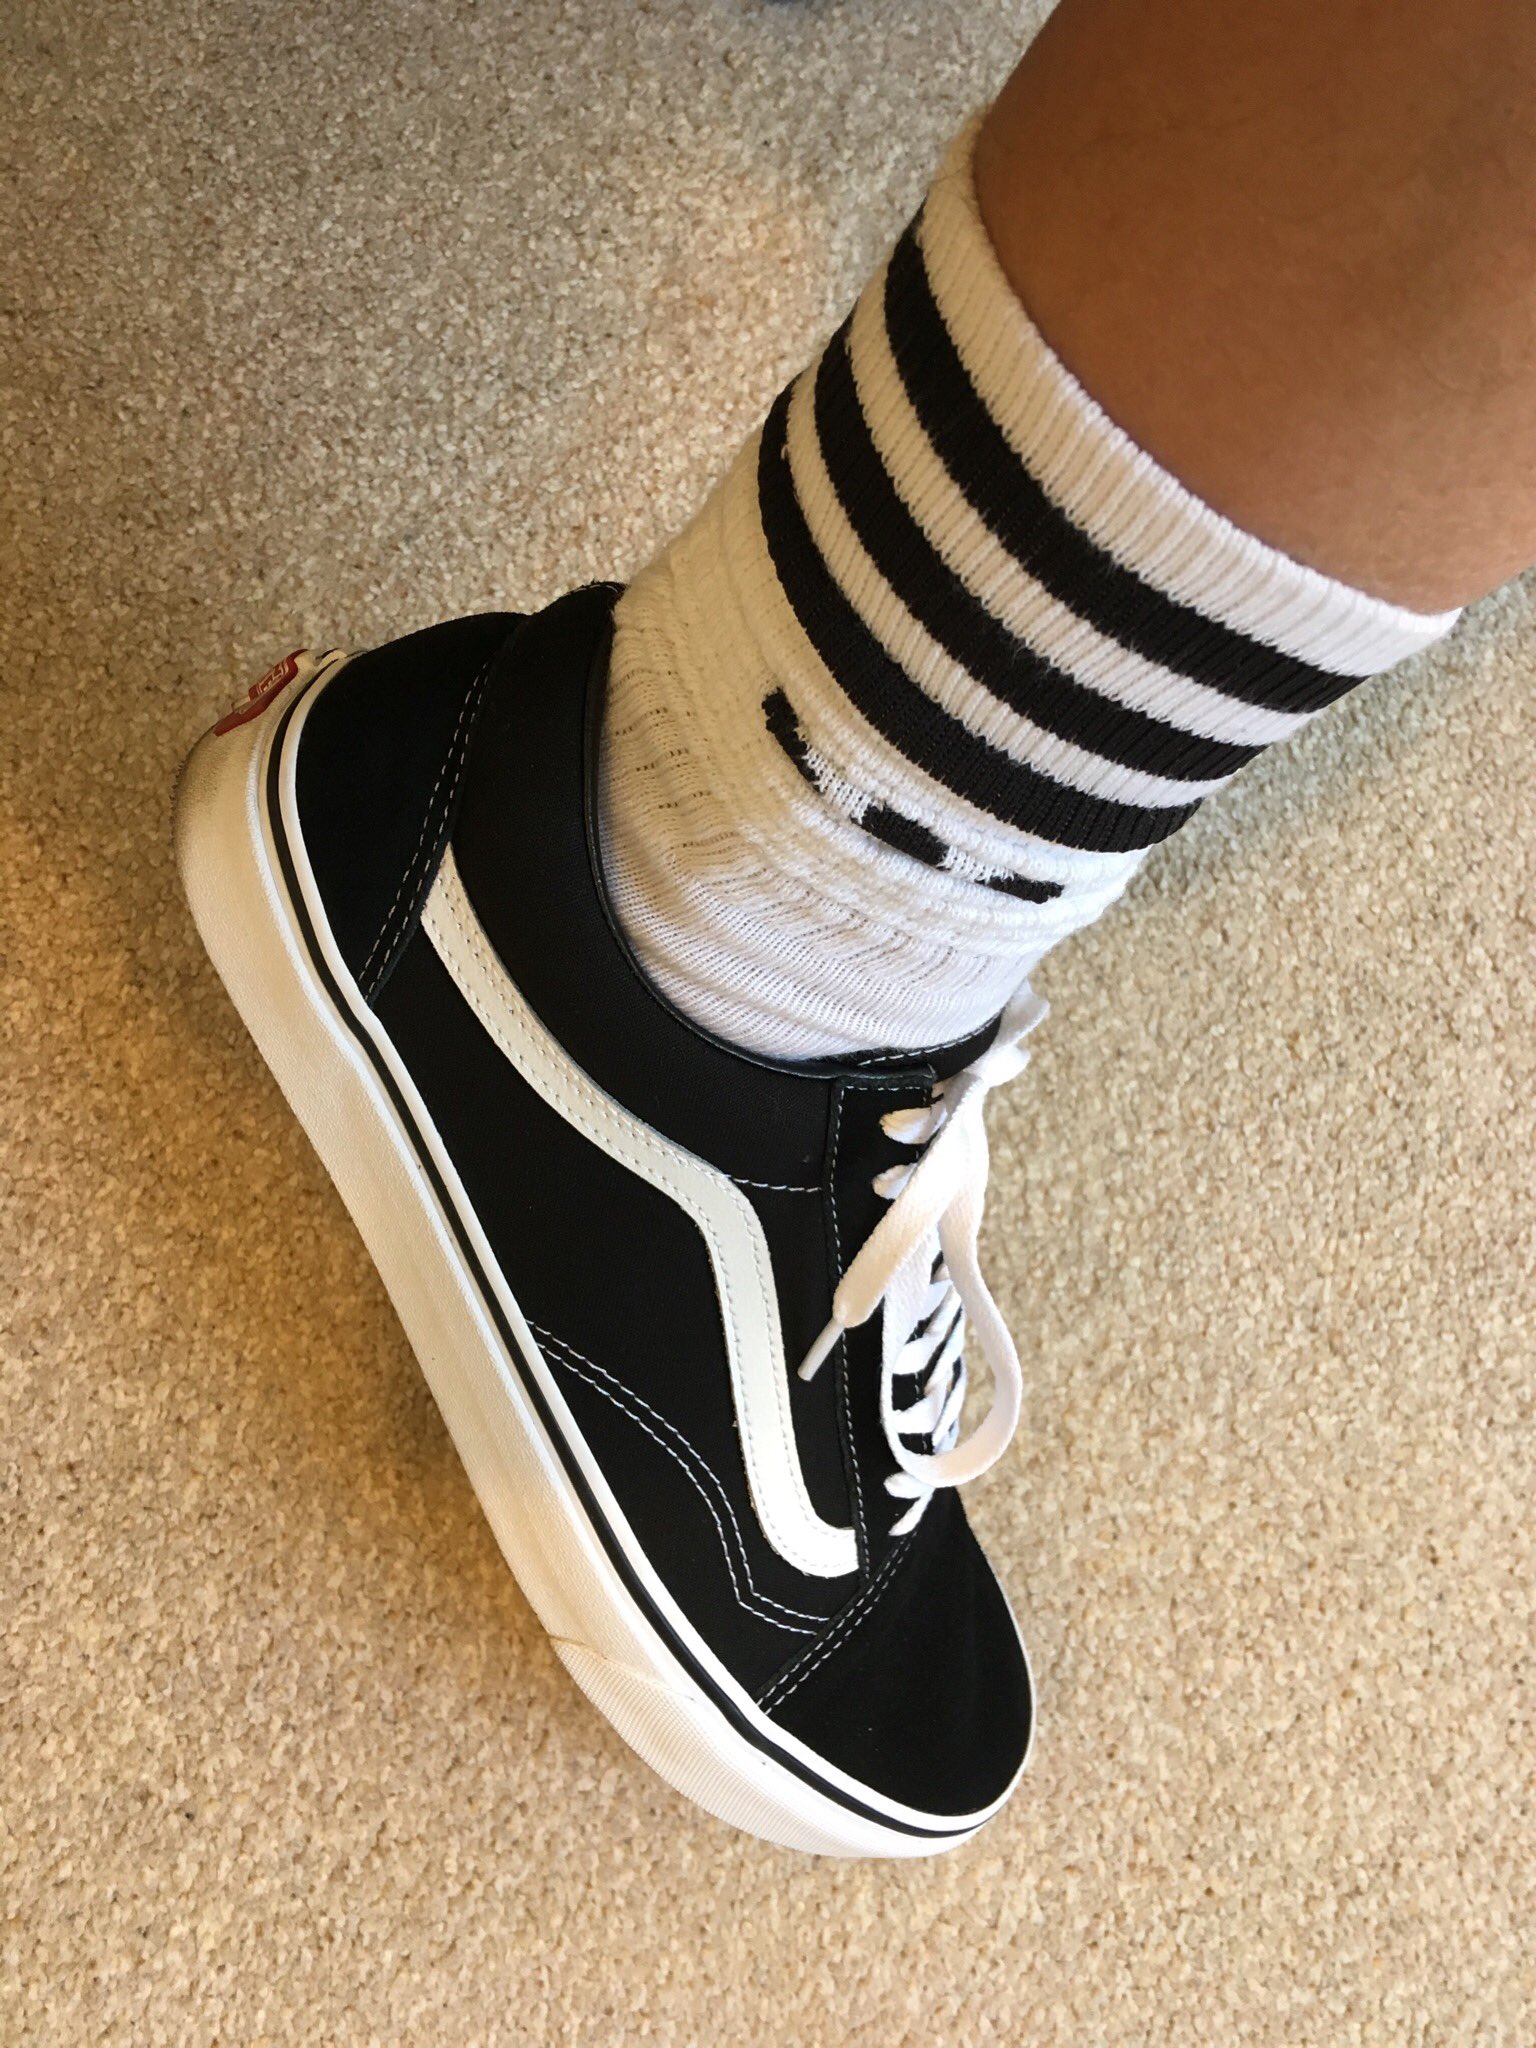 Markeer Stadscentrum op gang brengen Lee 🇬🇧👟🧢🧦 on Twitter: "My mate @trainerboi23 said the new Adidas socks  would look good with Vans. I agree :) https://t.co/jqxSnqO7Nj" / Twitter